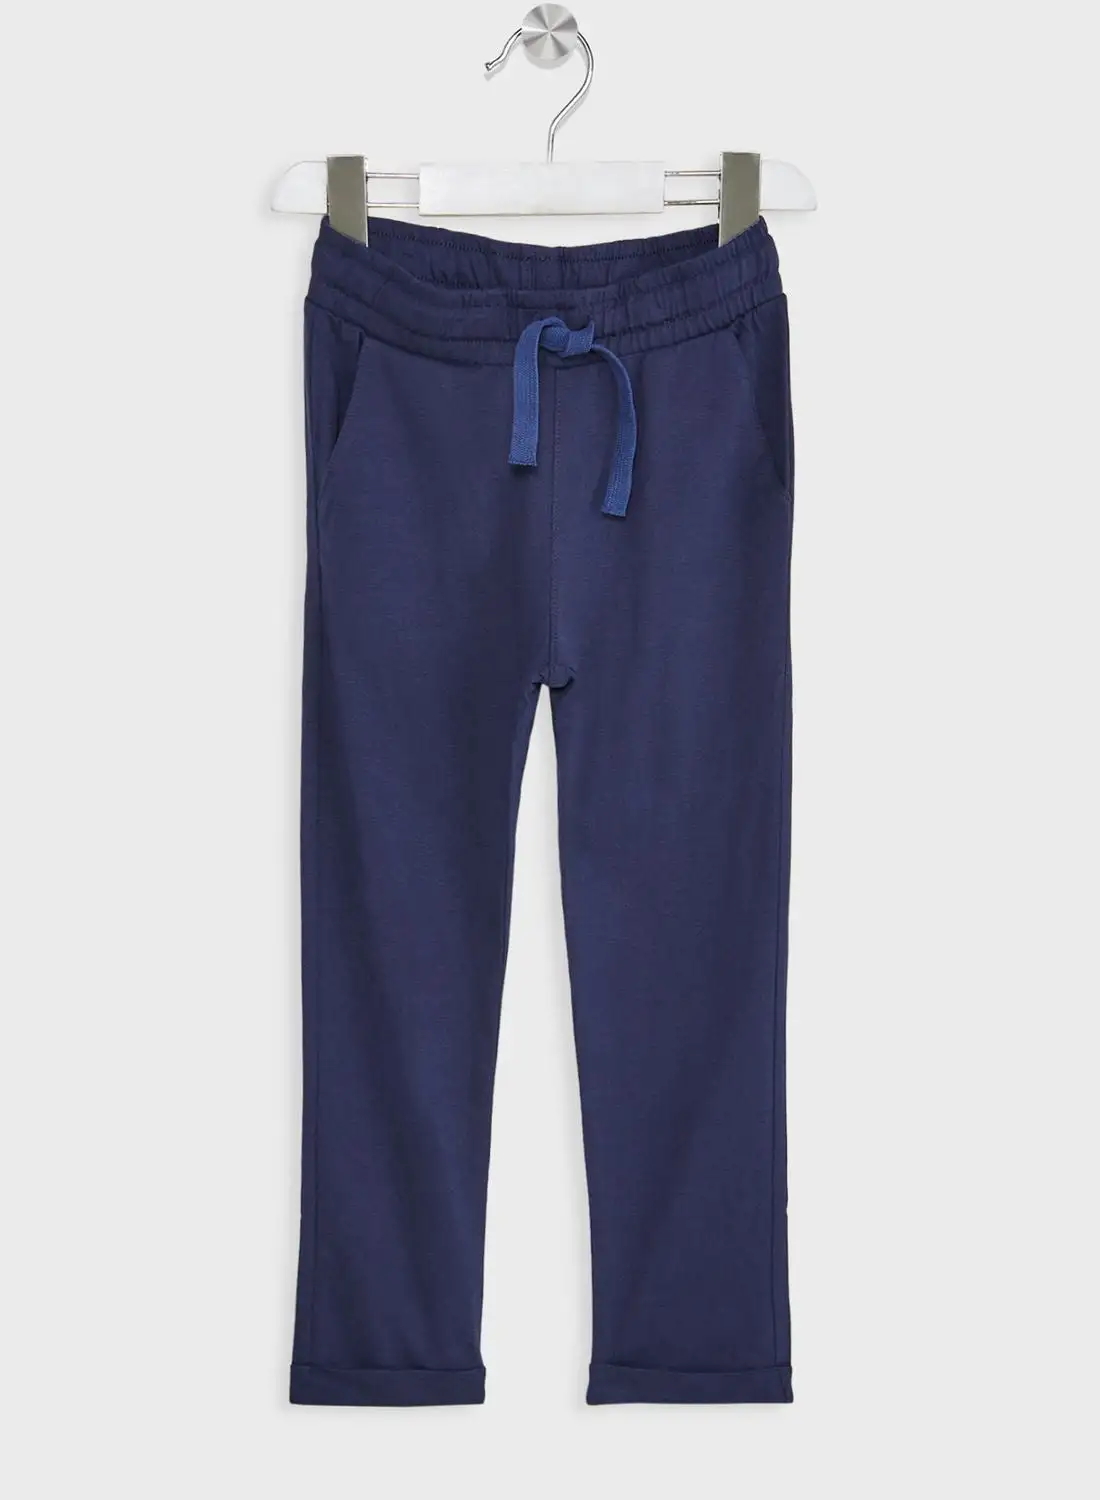 H&M Kids Essential Jersey Trackpants